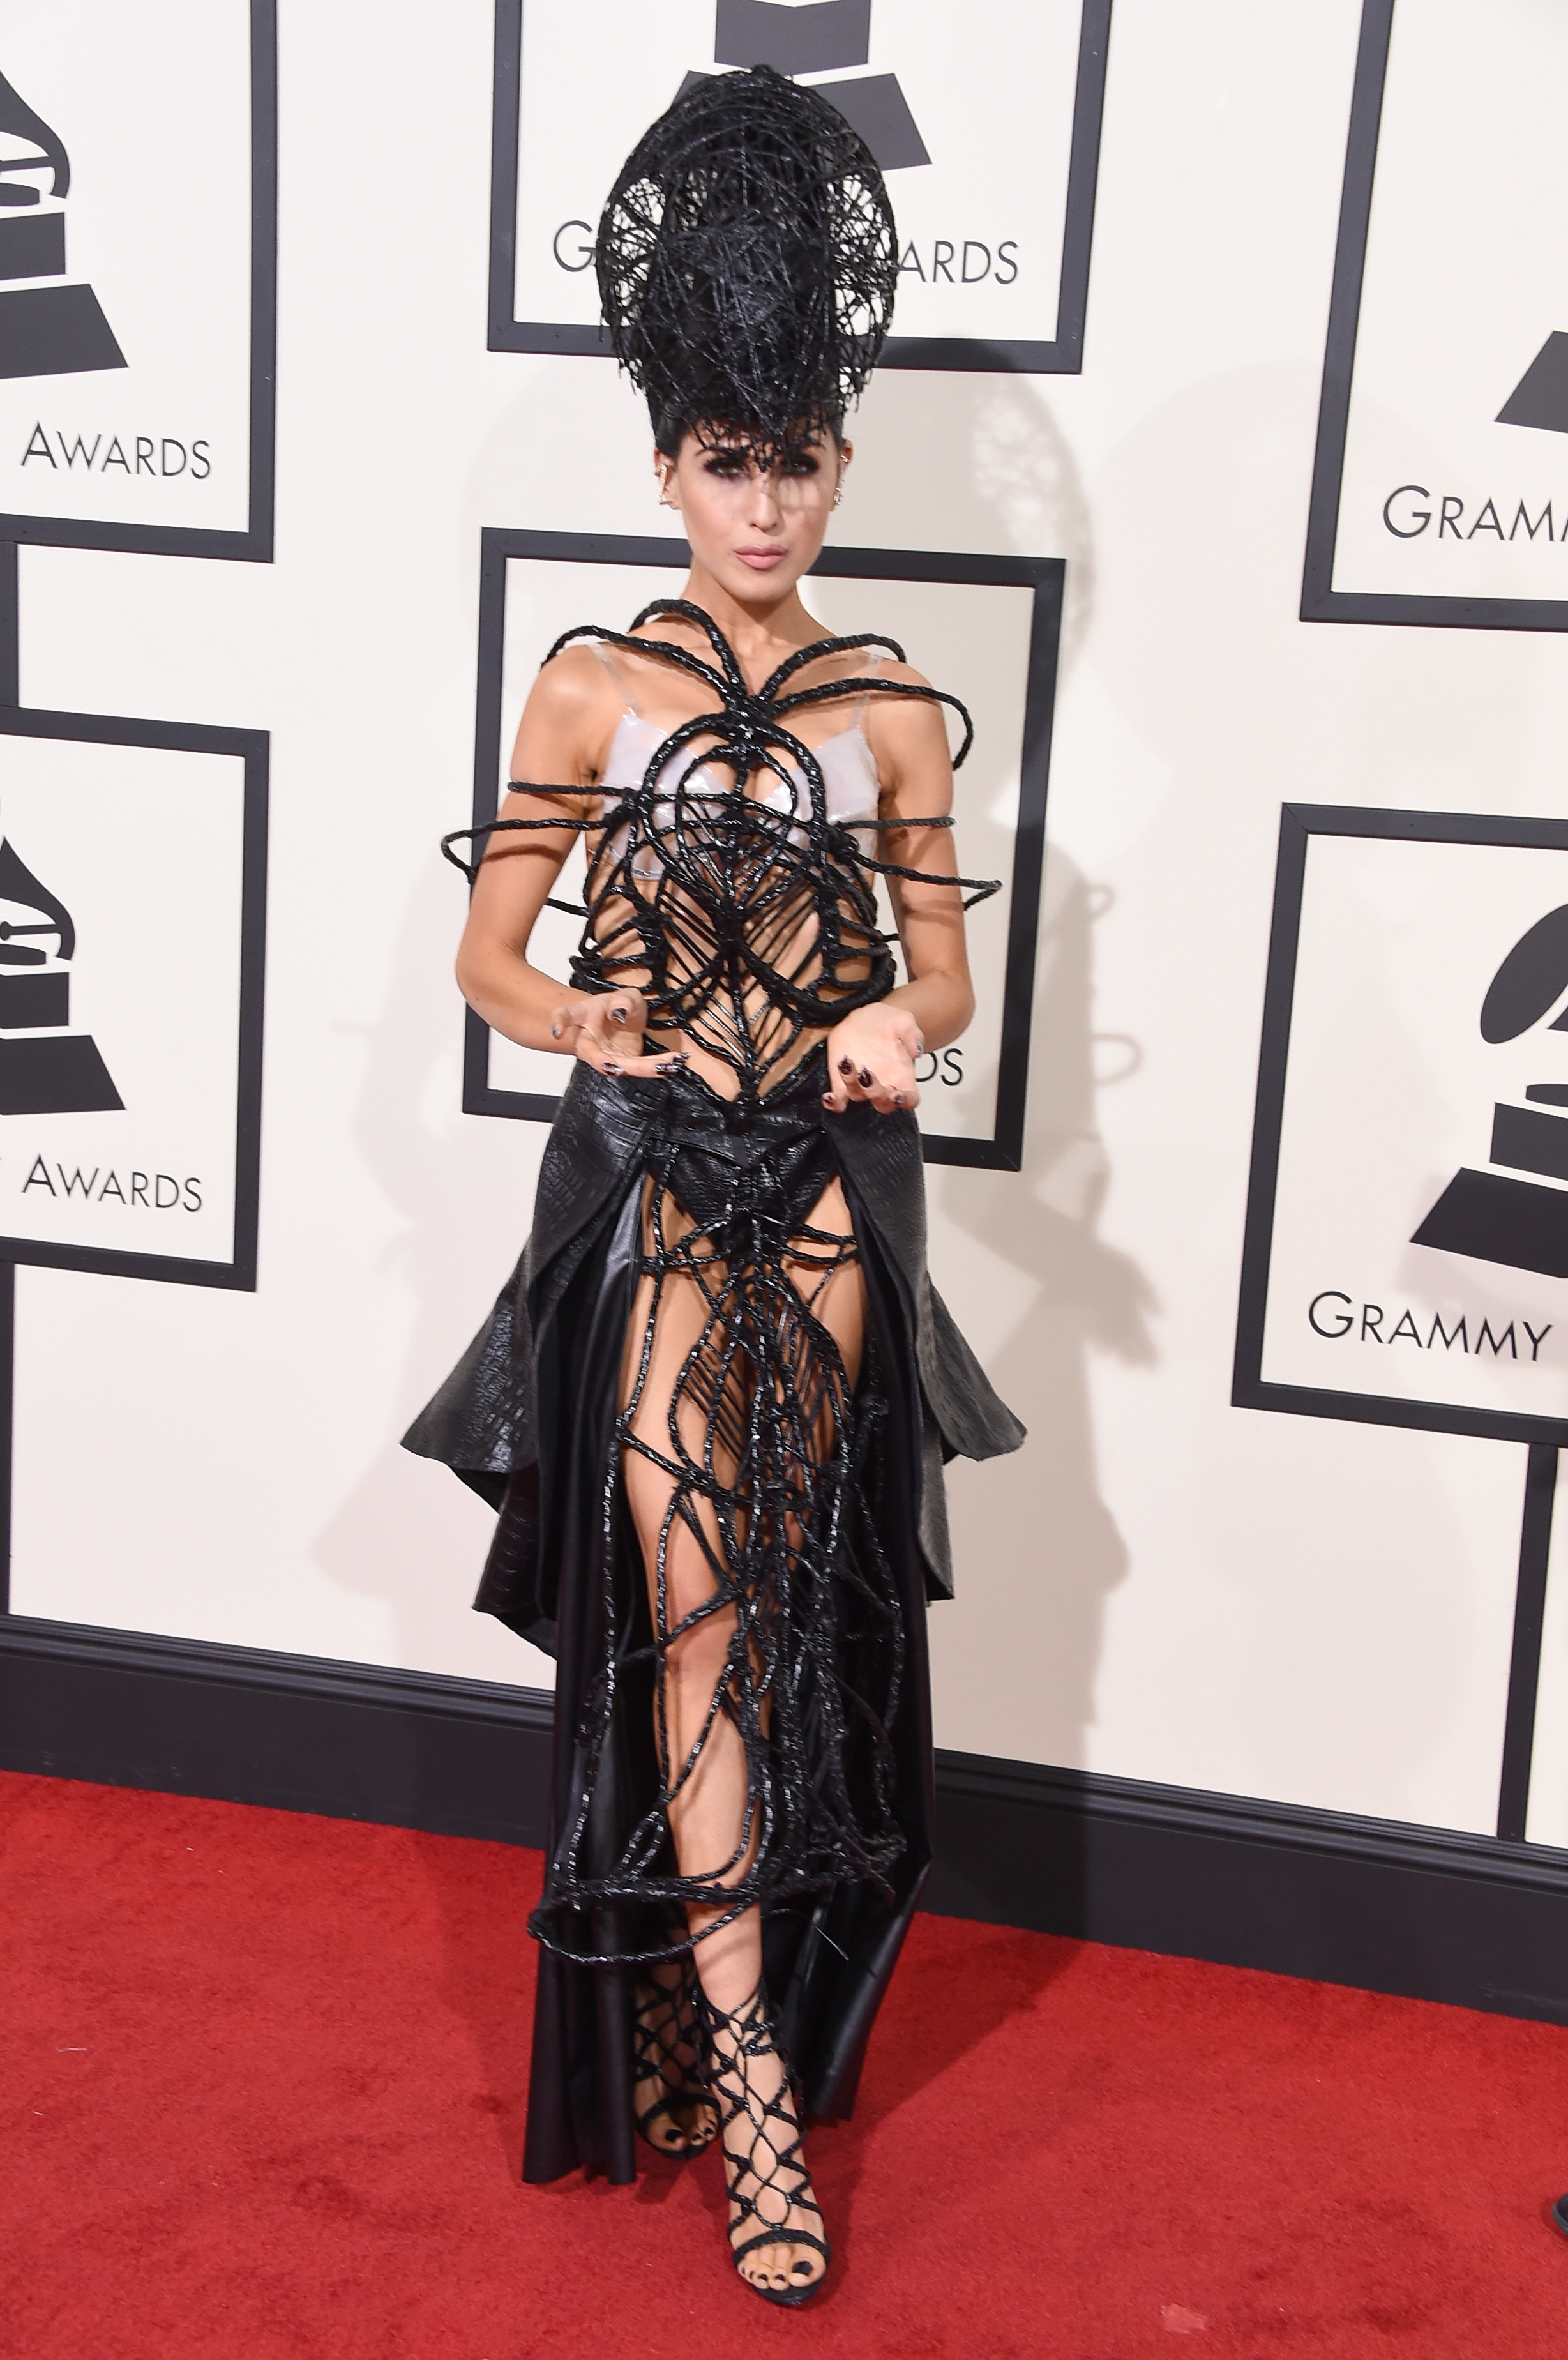 Z LaLa attends the 58th GRAMMY Awards at Staples Center on Feb. 15, 2016 in Los Angeles.